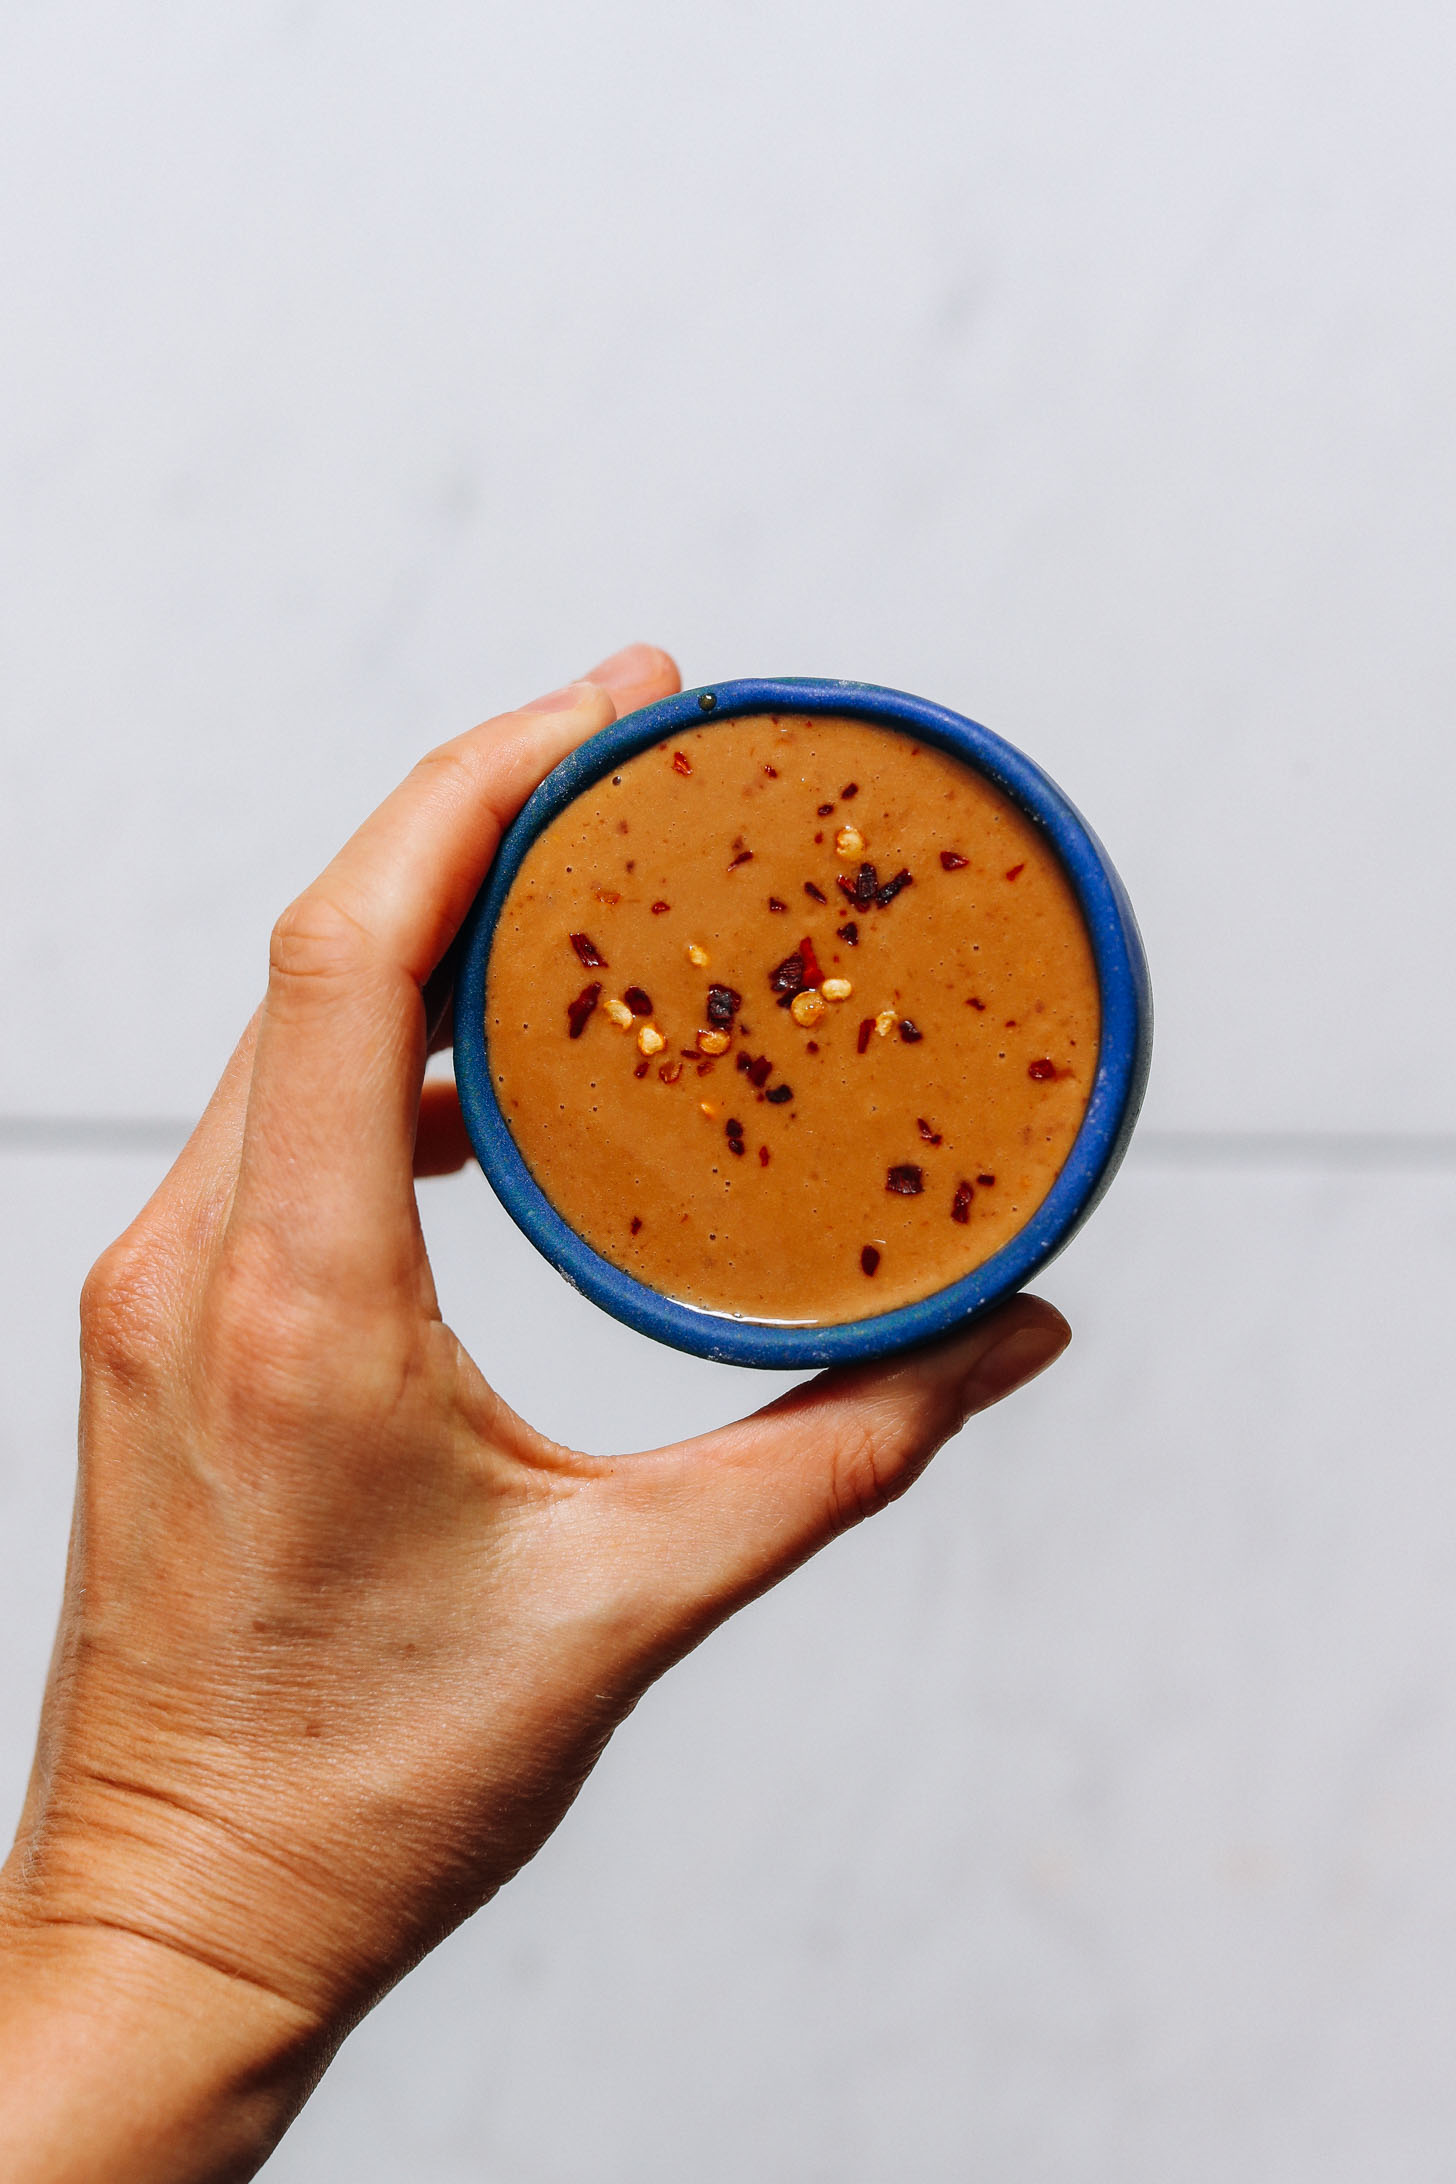 Holding a bowl of homemade peanut sauce topped with crushed red pepper